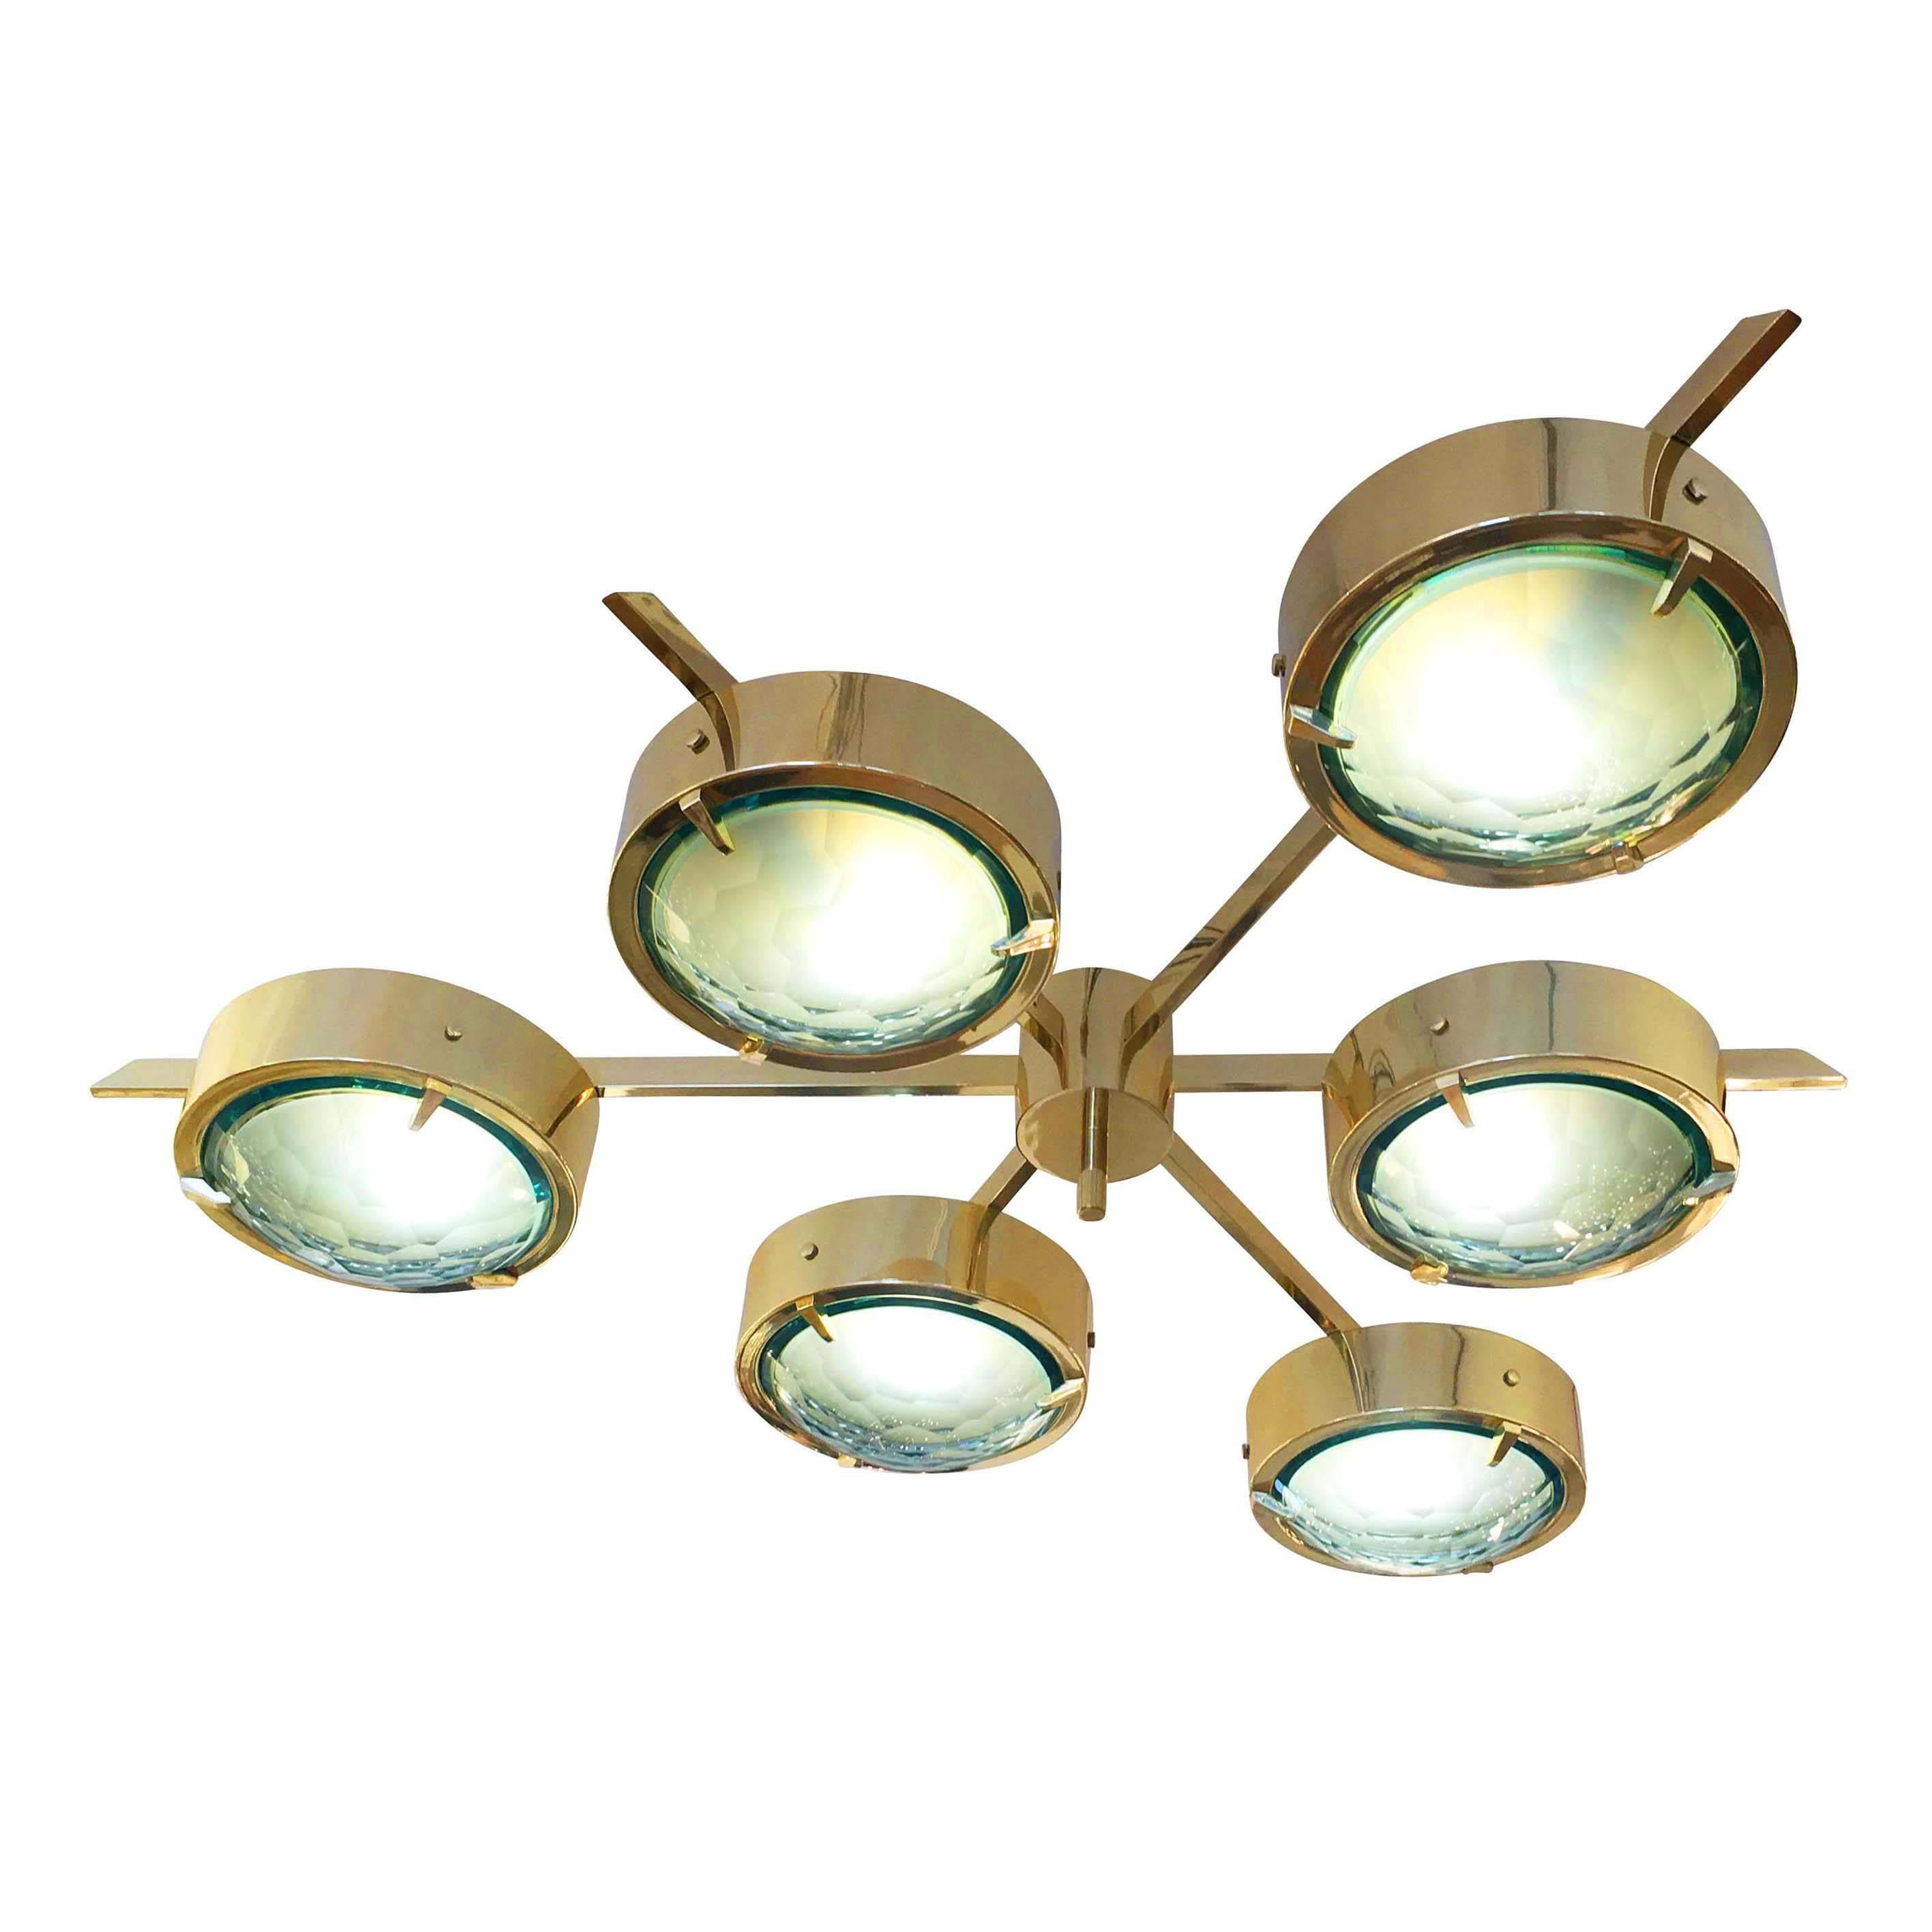 Stunning flush mount chandelier designed in collaboration with Italian artist Fedele Papagni. It features six disks with green faceted glass bottoms on a brass frame. The glass is frosted on the inside providing a soft diffused light. Can be